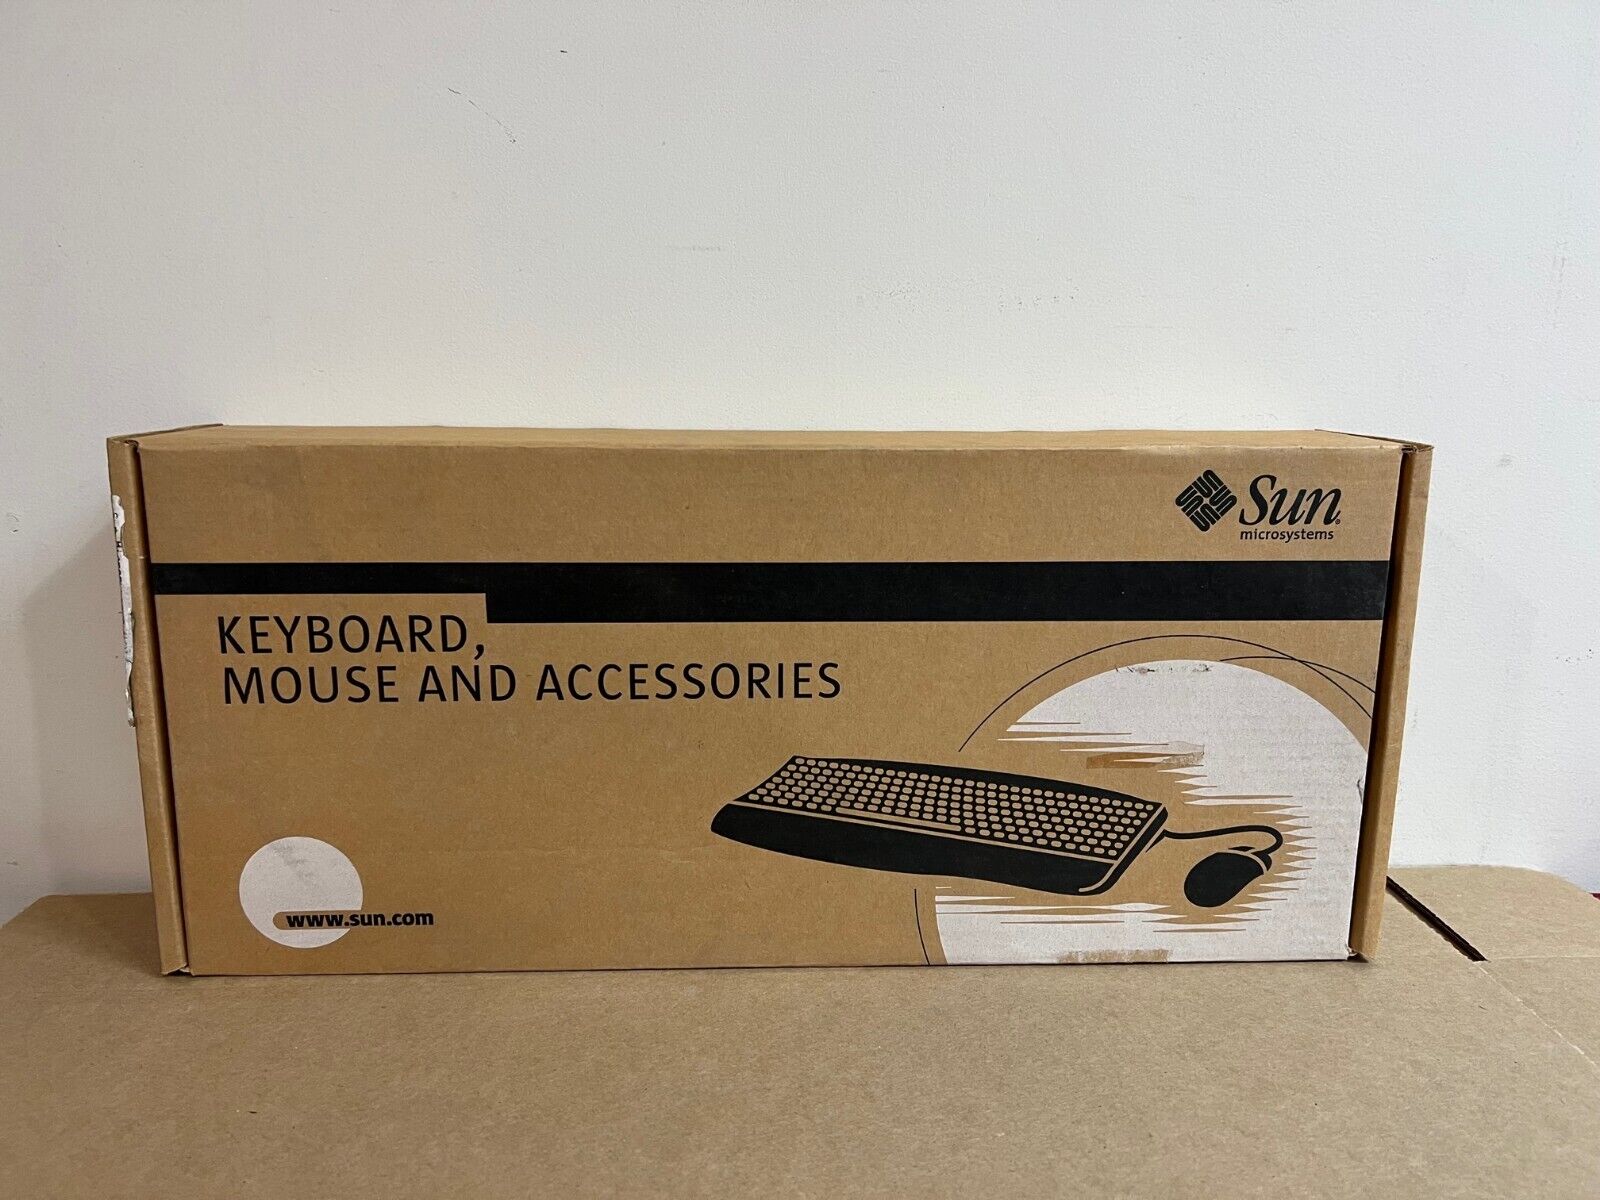 NEW FACTORY SEALED SUN MICROSYSTEMS KEYBOARD, MOUSE, & ACCESSORIES 565-1601-01